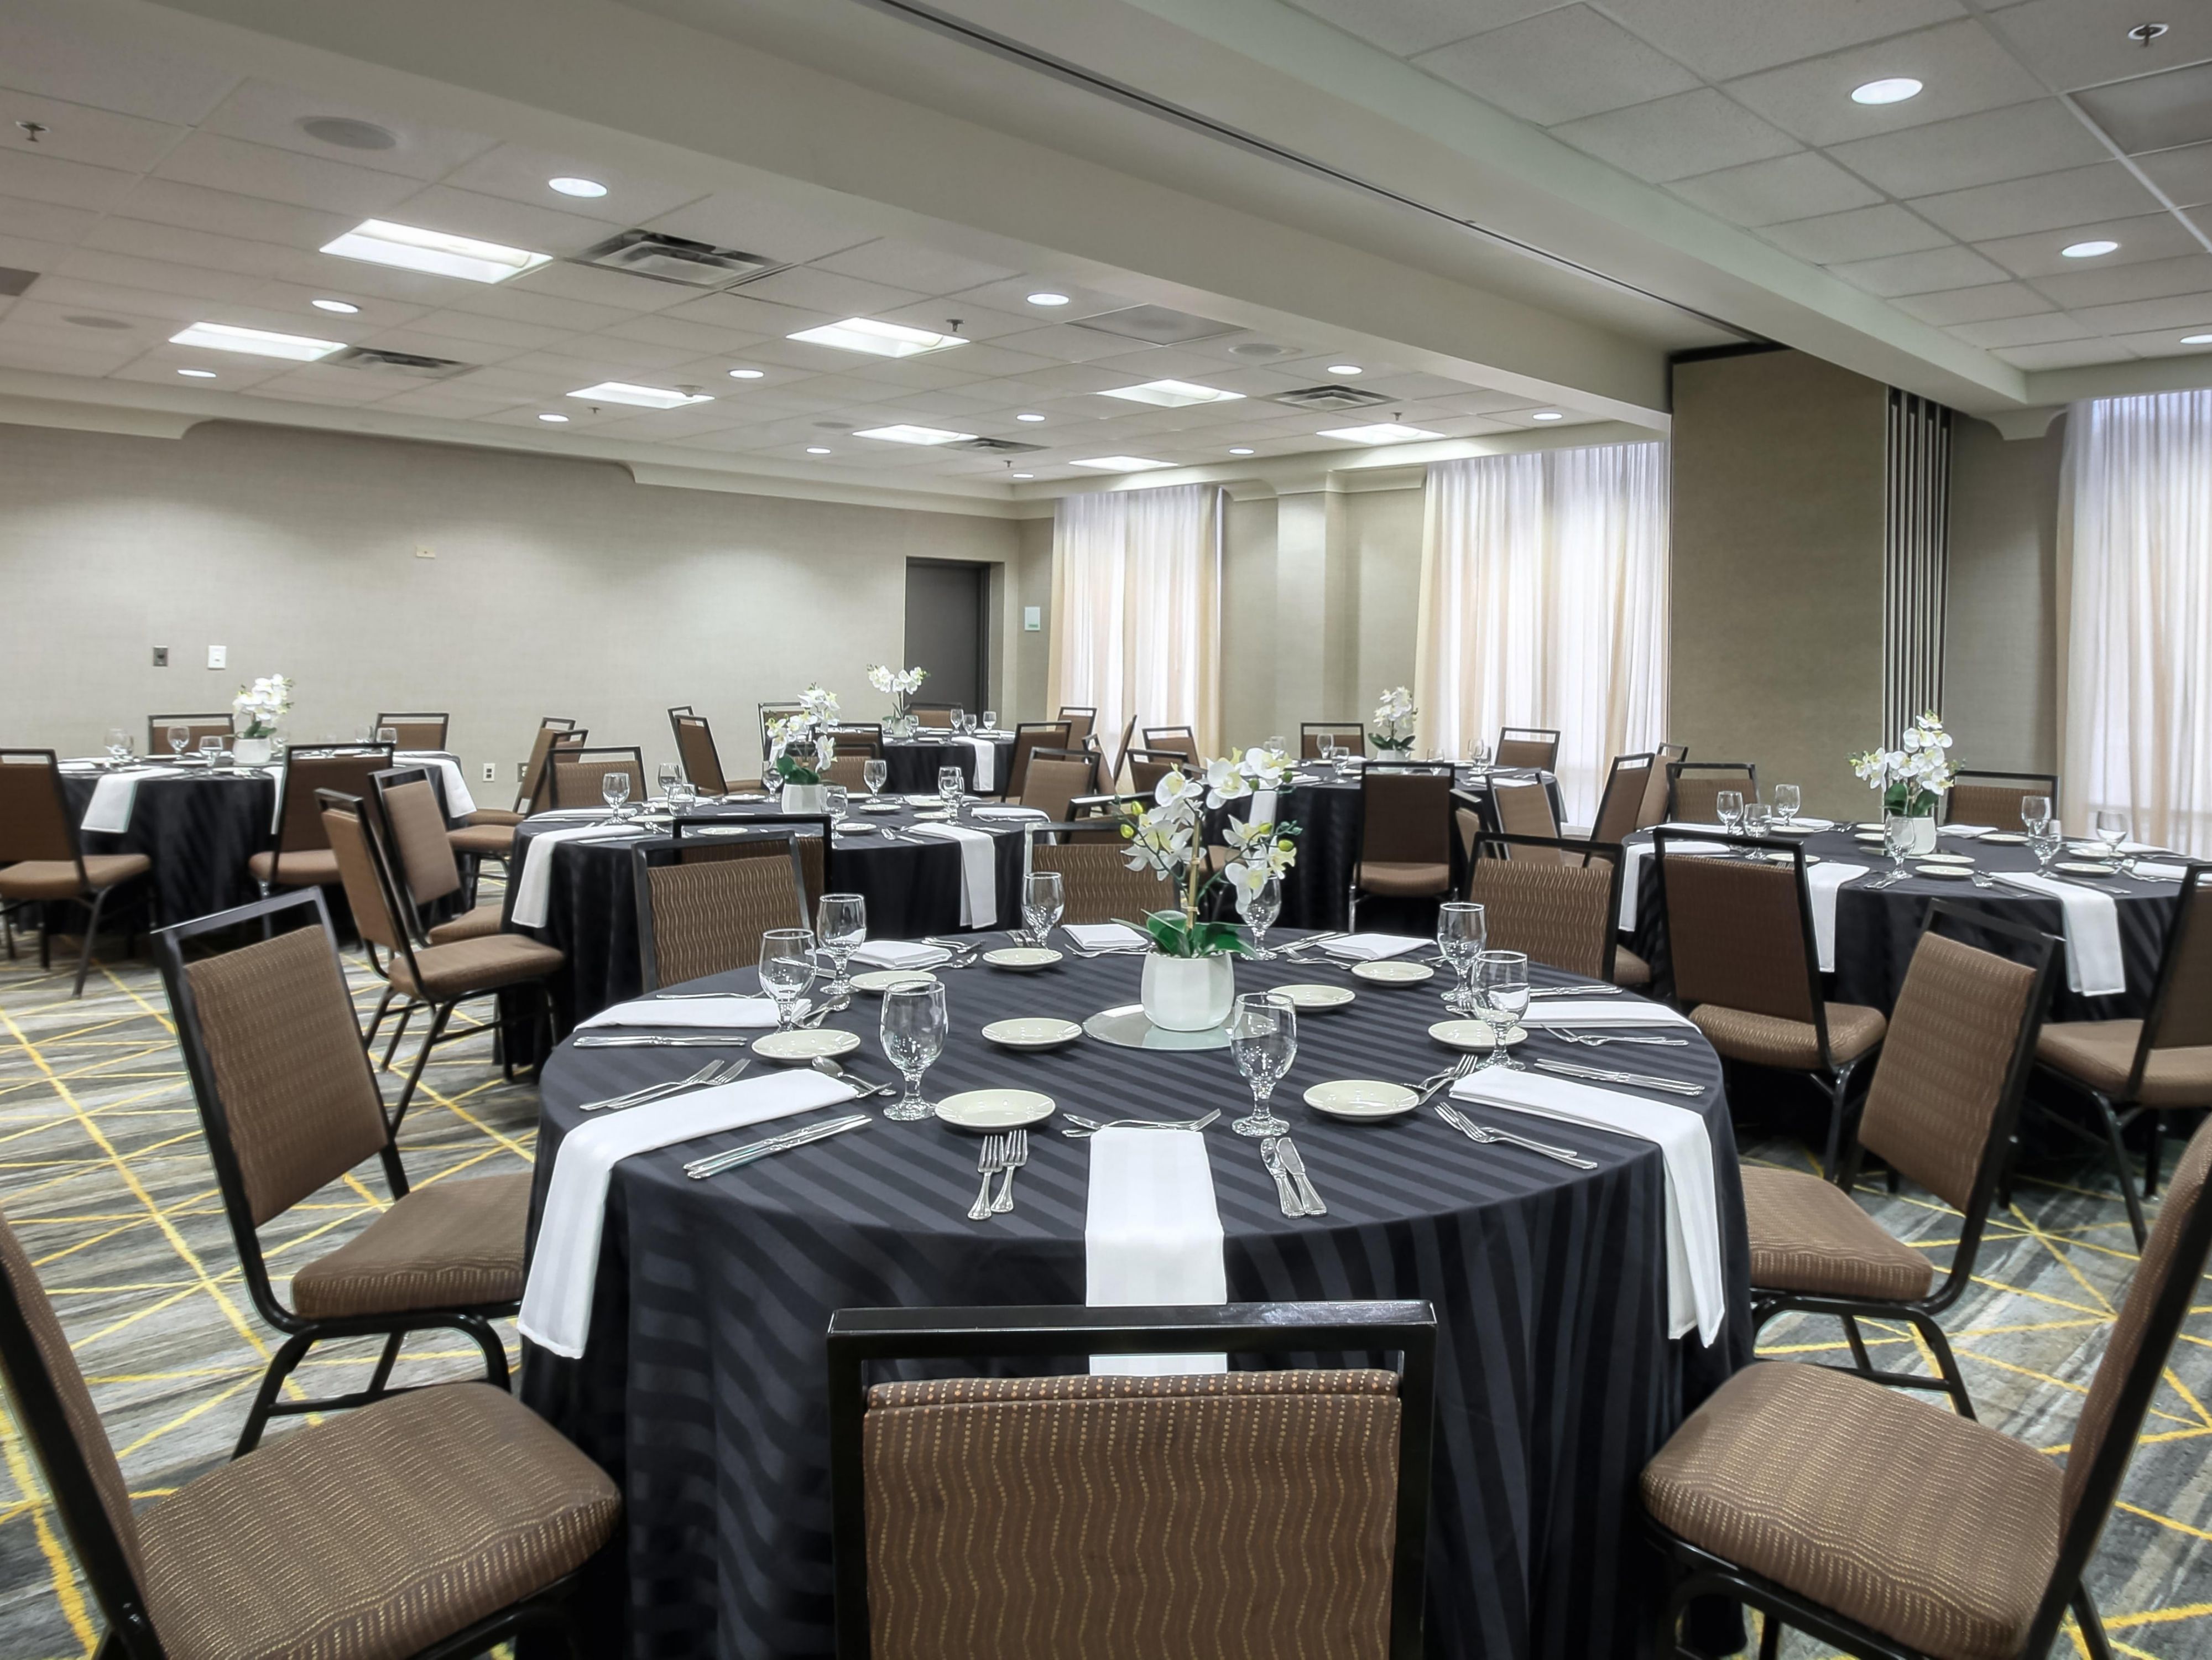 Our hotel is the premier choice for meetings, events, and weddings. Our 12000 sq ft of flexible meeting space can accommodate up to 400 guests. Our on-site professional event planners and catering teams will create custom menus and help guests to create memorable occasions.